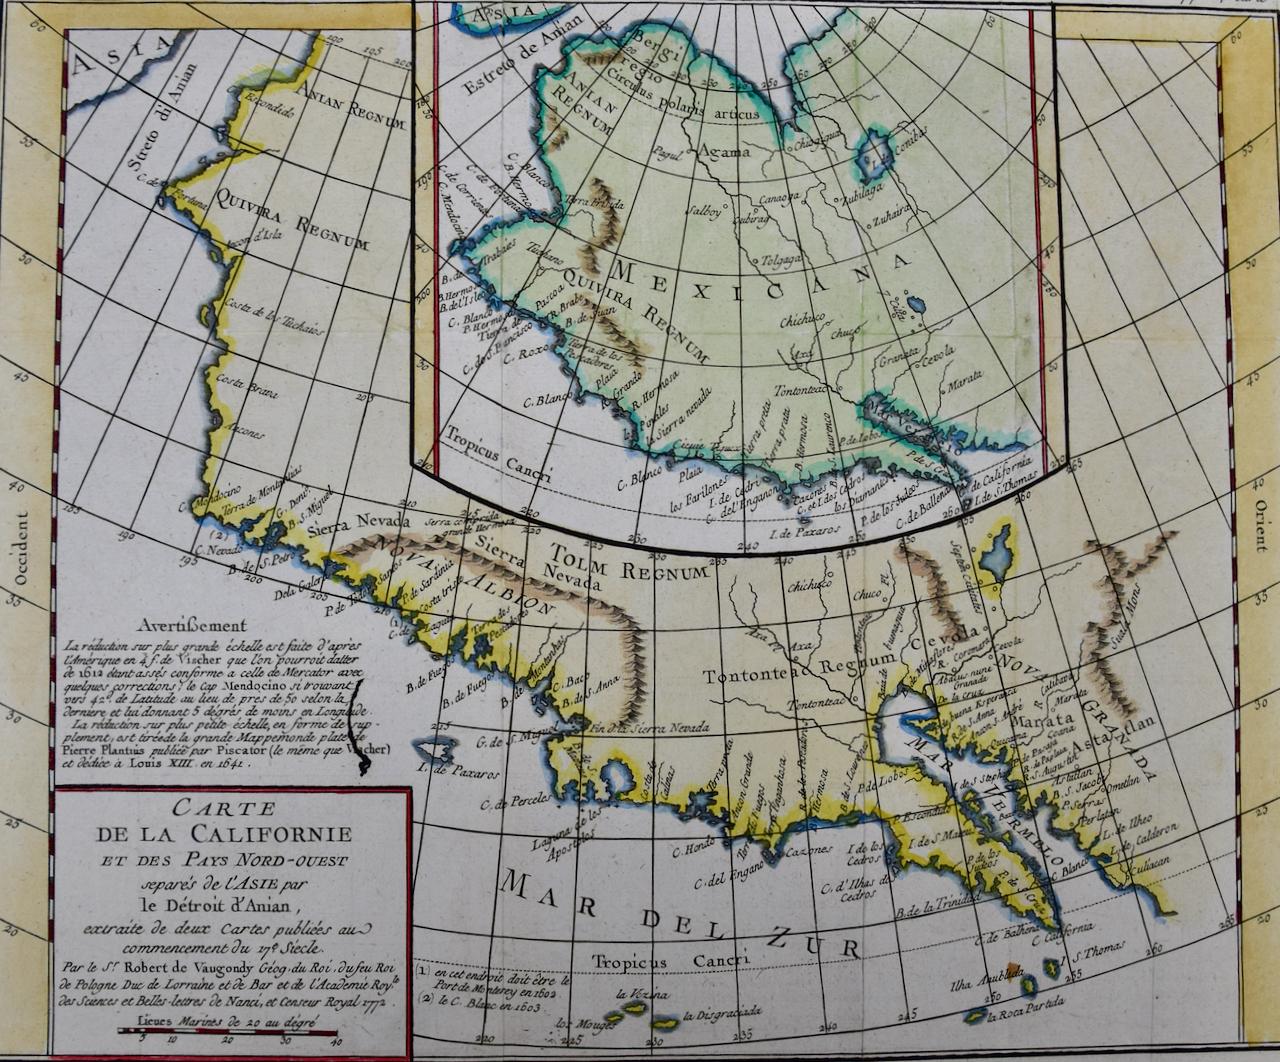 This an 18th century hand-colored map of the western portions of North America entitled 